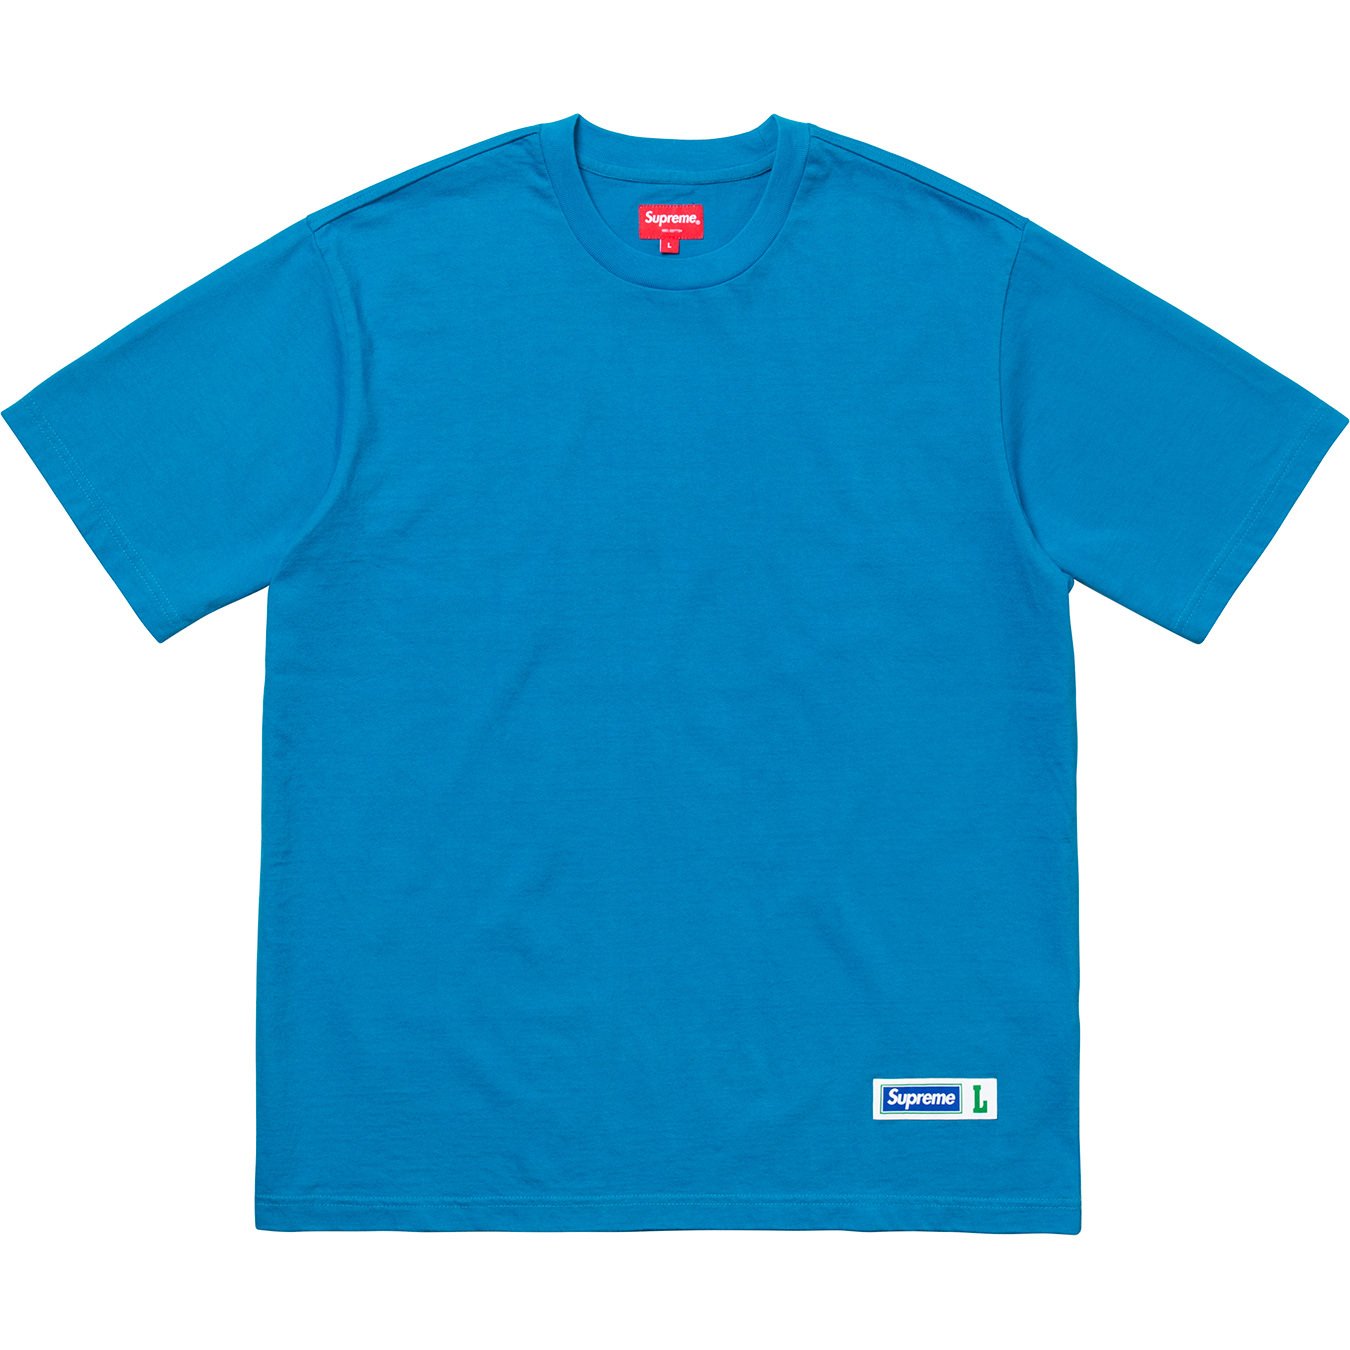 Supreme Athletic Label S/S Top Blue メンズ - SS18 - JP